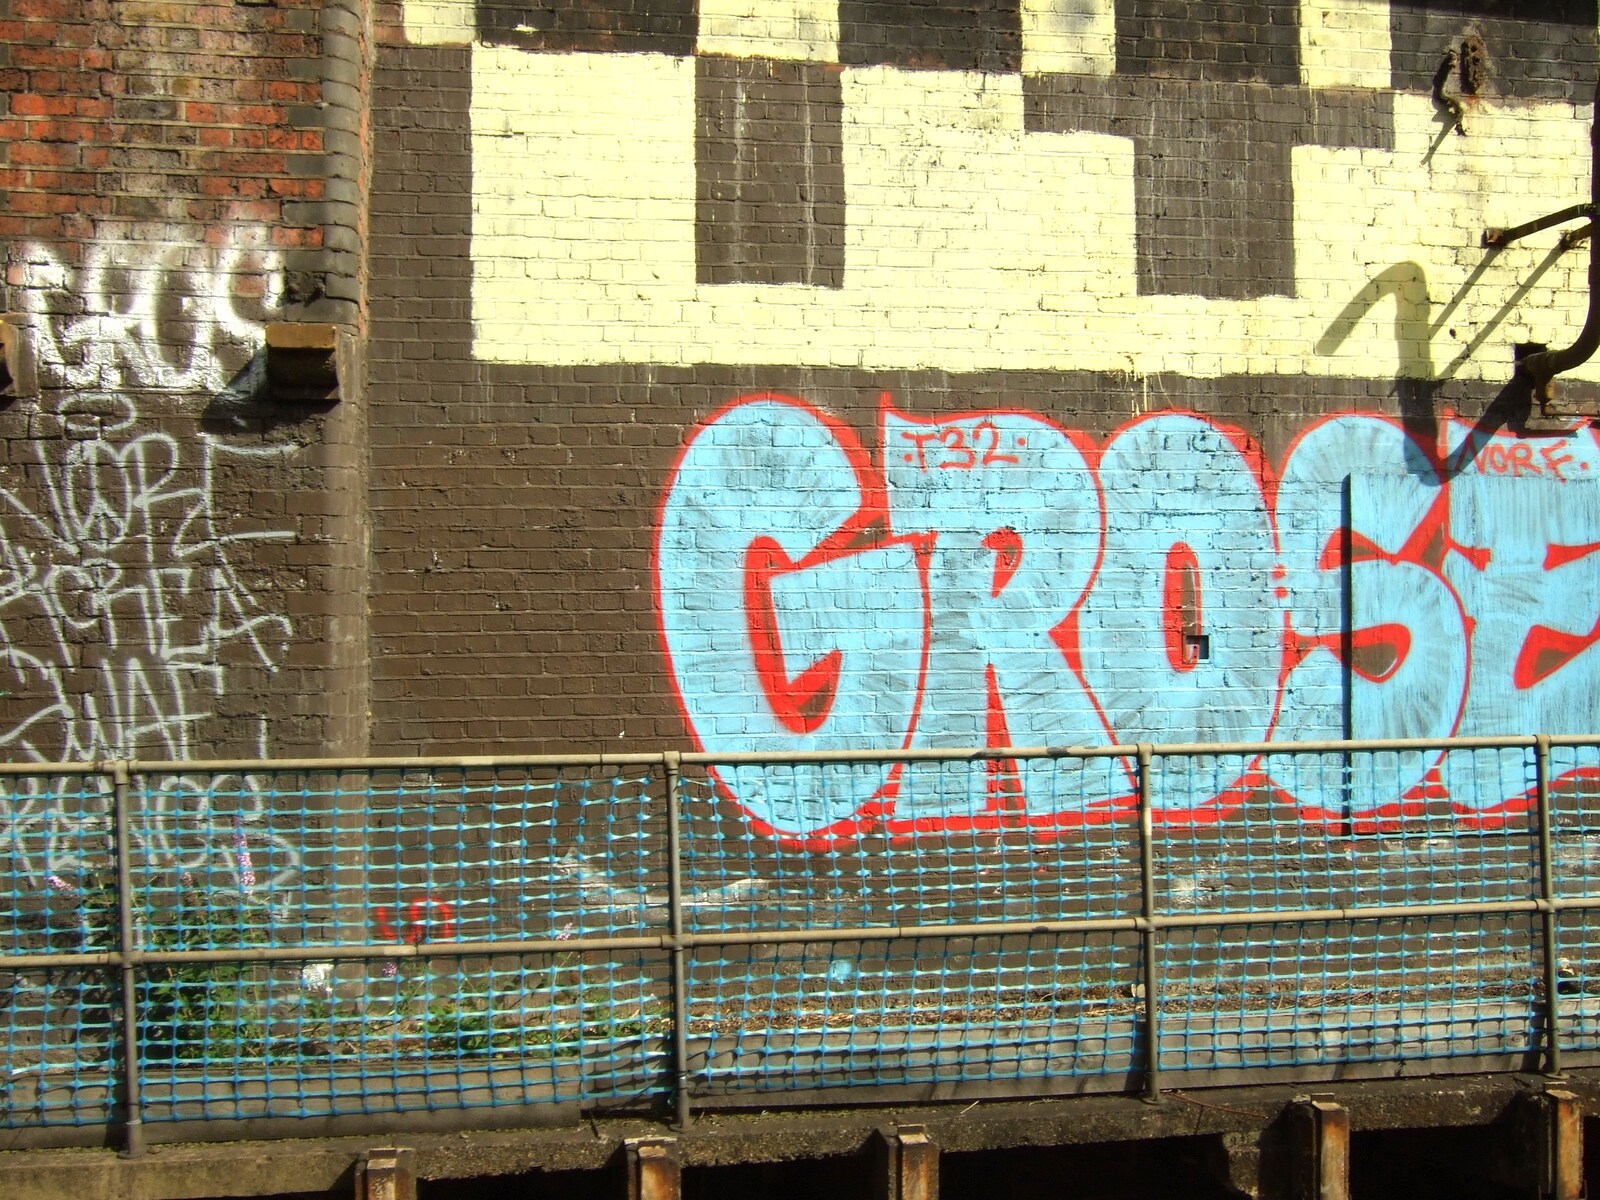 An unusual spelling of 'gross' in graffiti form from Railway Graffiti, Fred's Balance Bike, and Lydia Visits - London and Brome, Suffolk, 24th August 2011